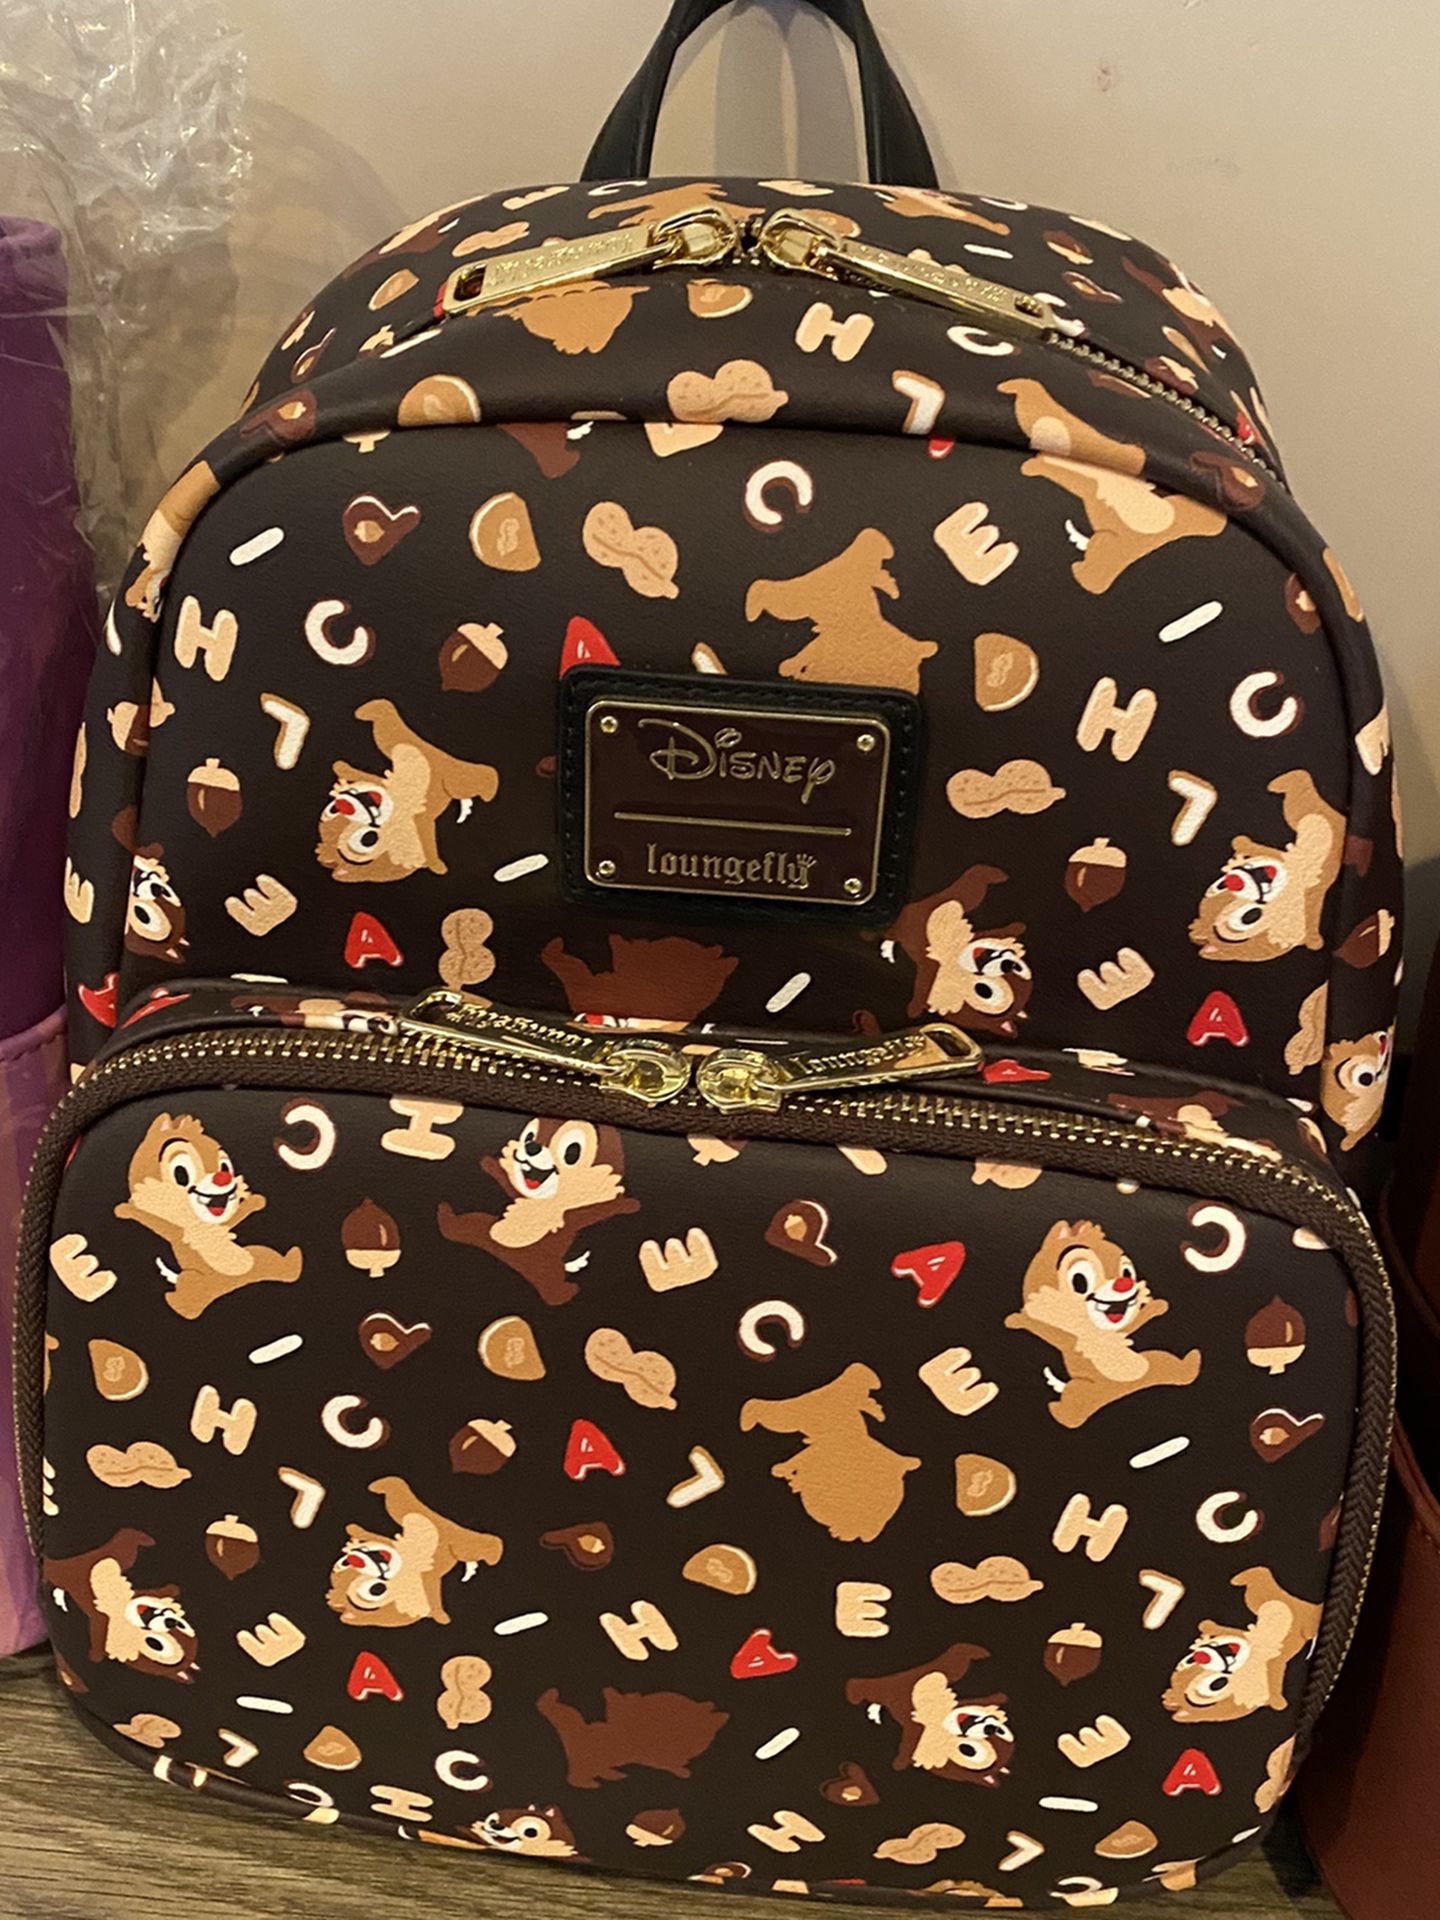 NWT Chip And Dale Disney Loungefly